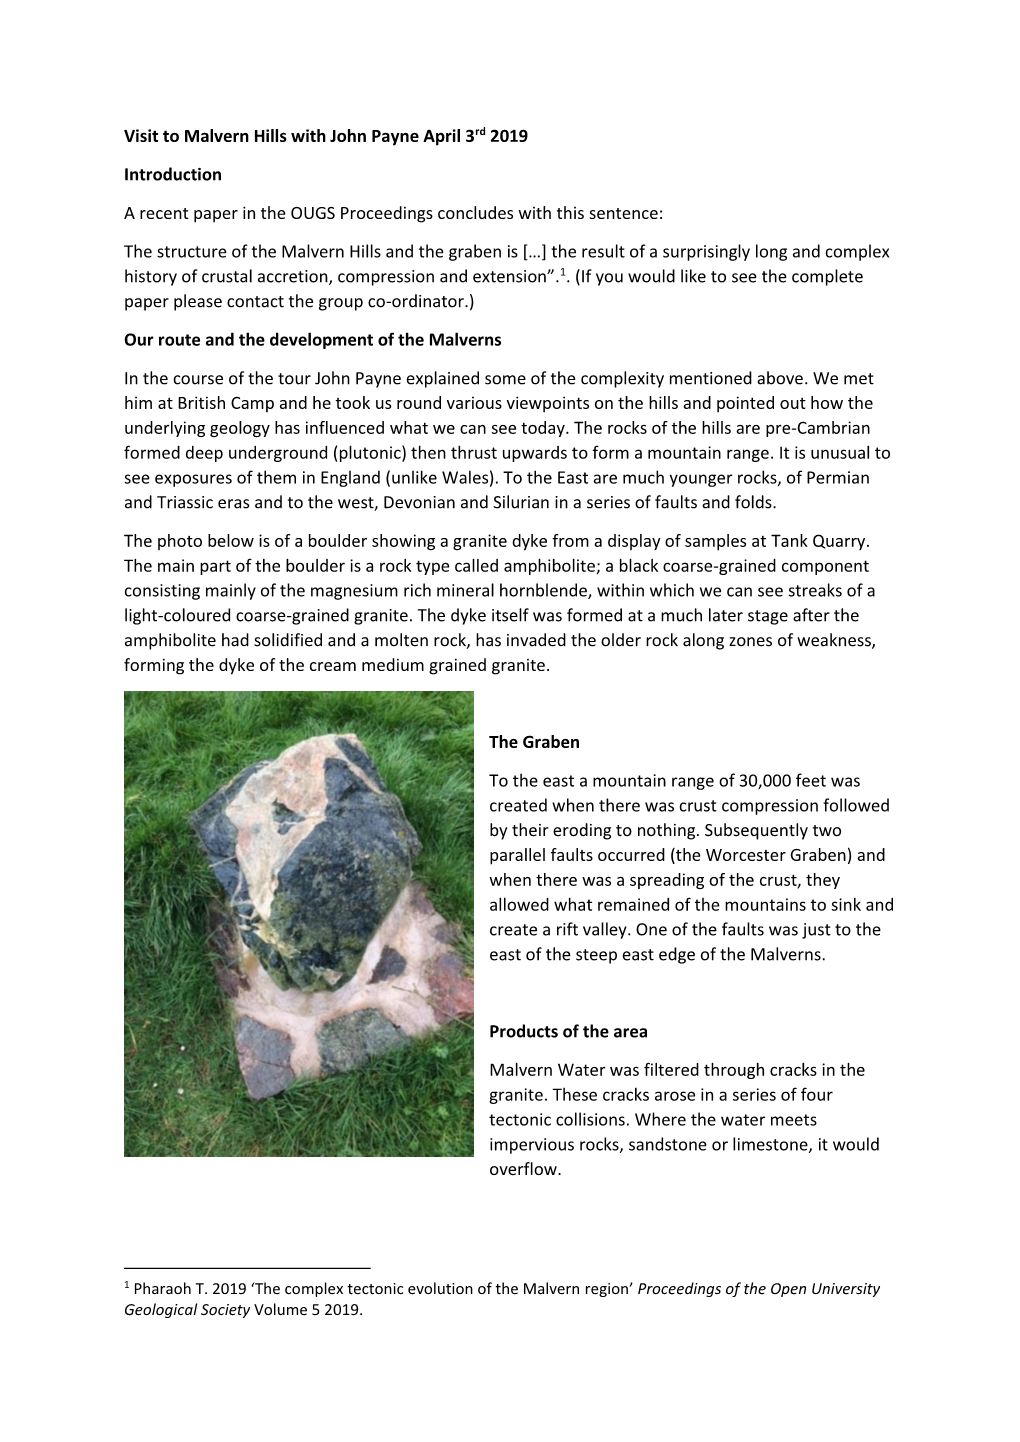 Visit to Malvern Hills with John Payne April 3Rd 2019 Introduction a Recent Paper in the OUGS Proceedings Concludes with This Se